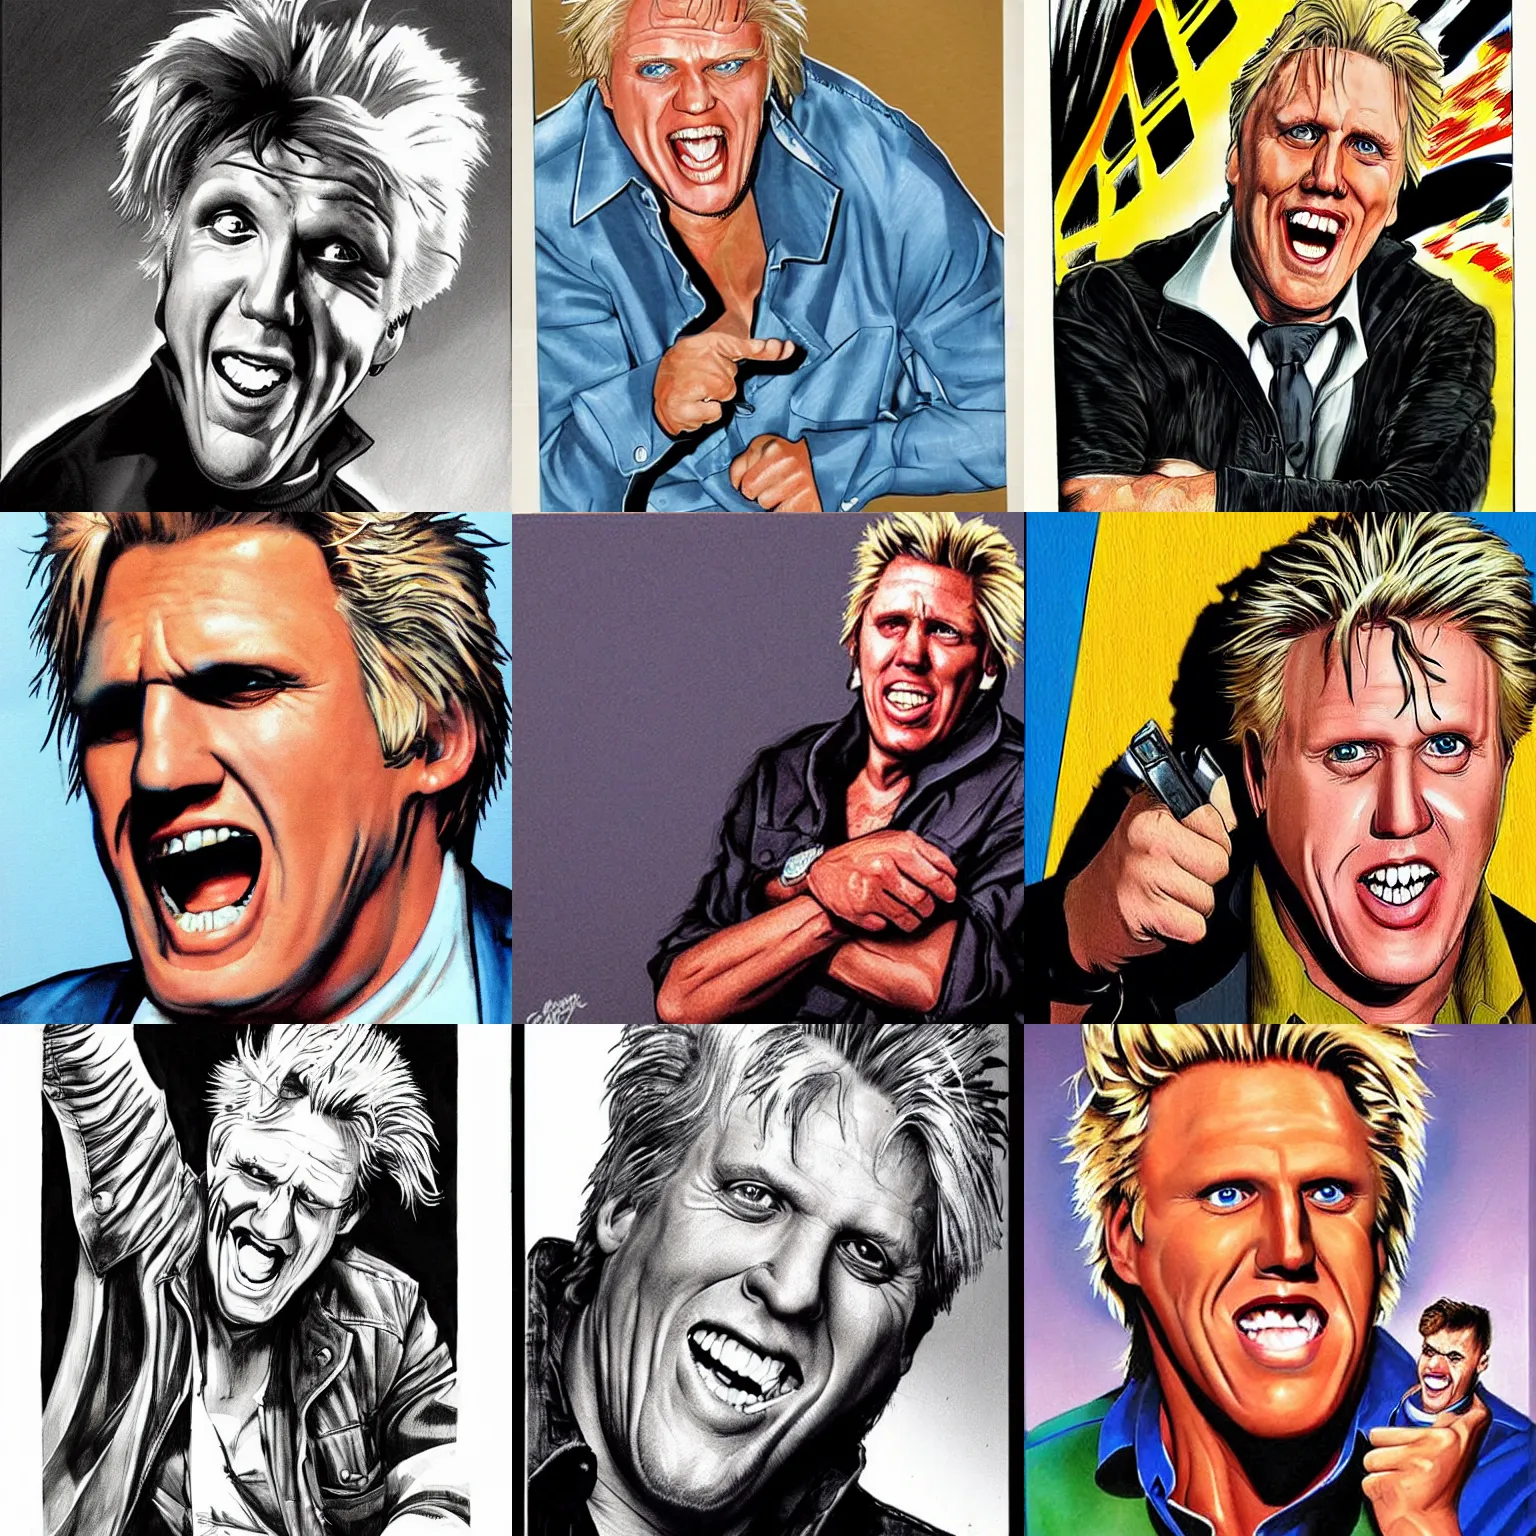 Prompt: Gary Busey by Simon Bisley